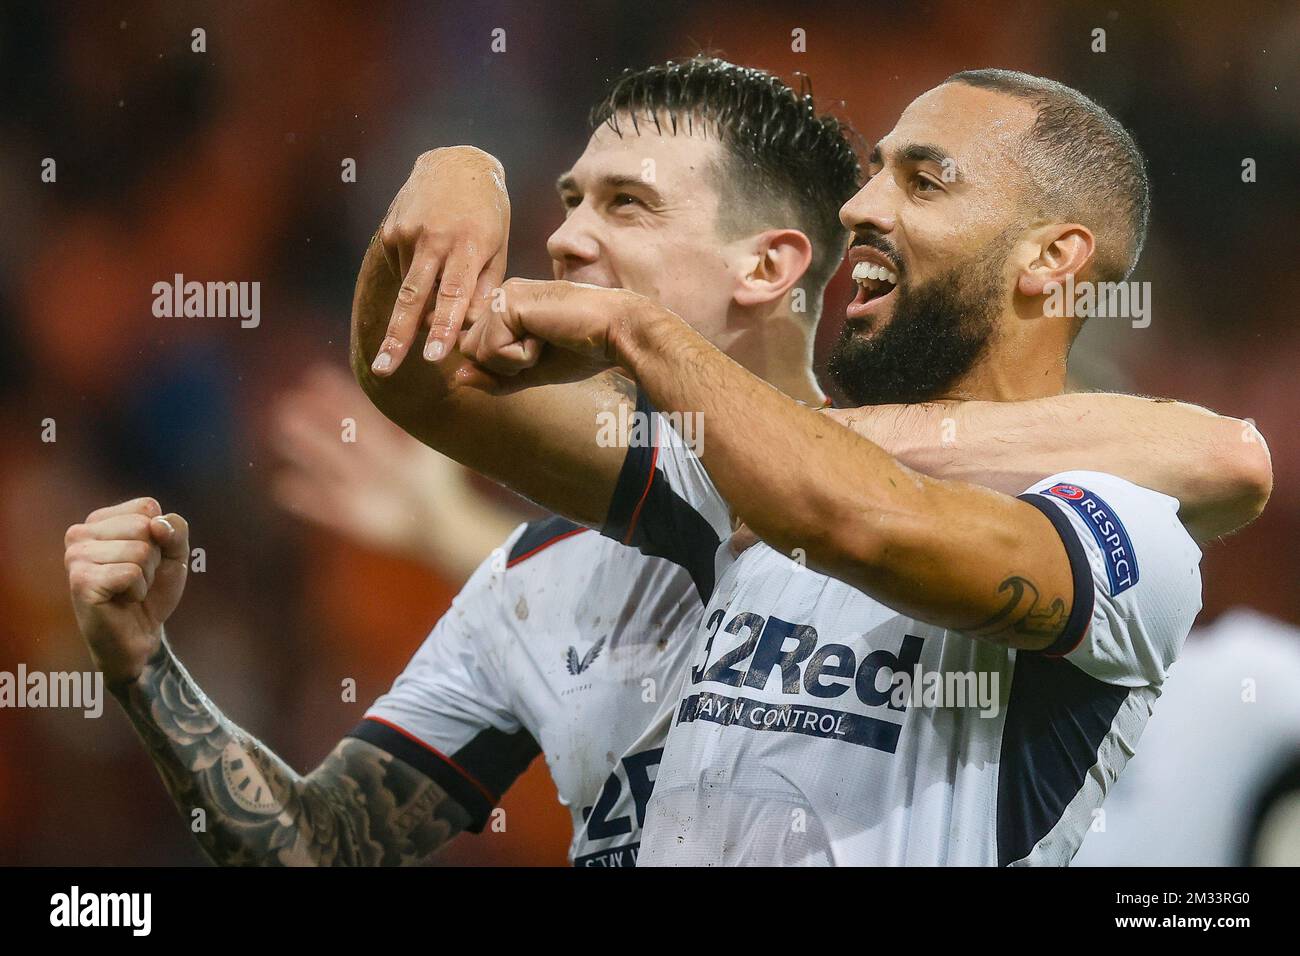 Rangers' Kemar Roofe celebrates after scoring during a soccer match between Belgian team Standard de Liege and Scottish club Rangers FC, Thursday 22 October 2020 in Liege, on the first day of the group phase (group D) of the UEFA Europa League competition. BELGA PHOTO BRUNO FAHY Stock Photo